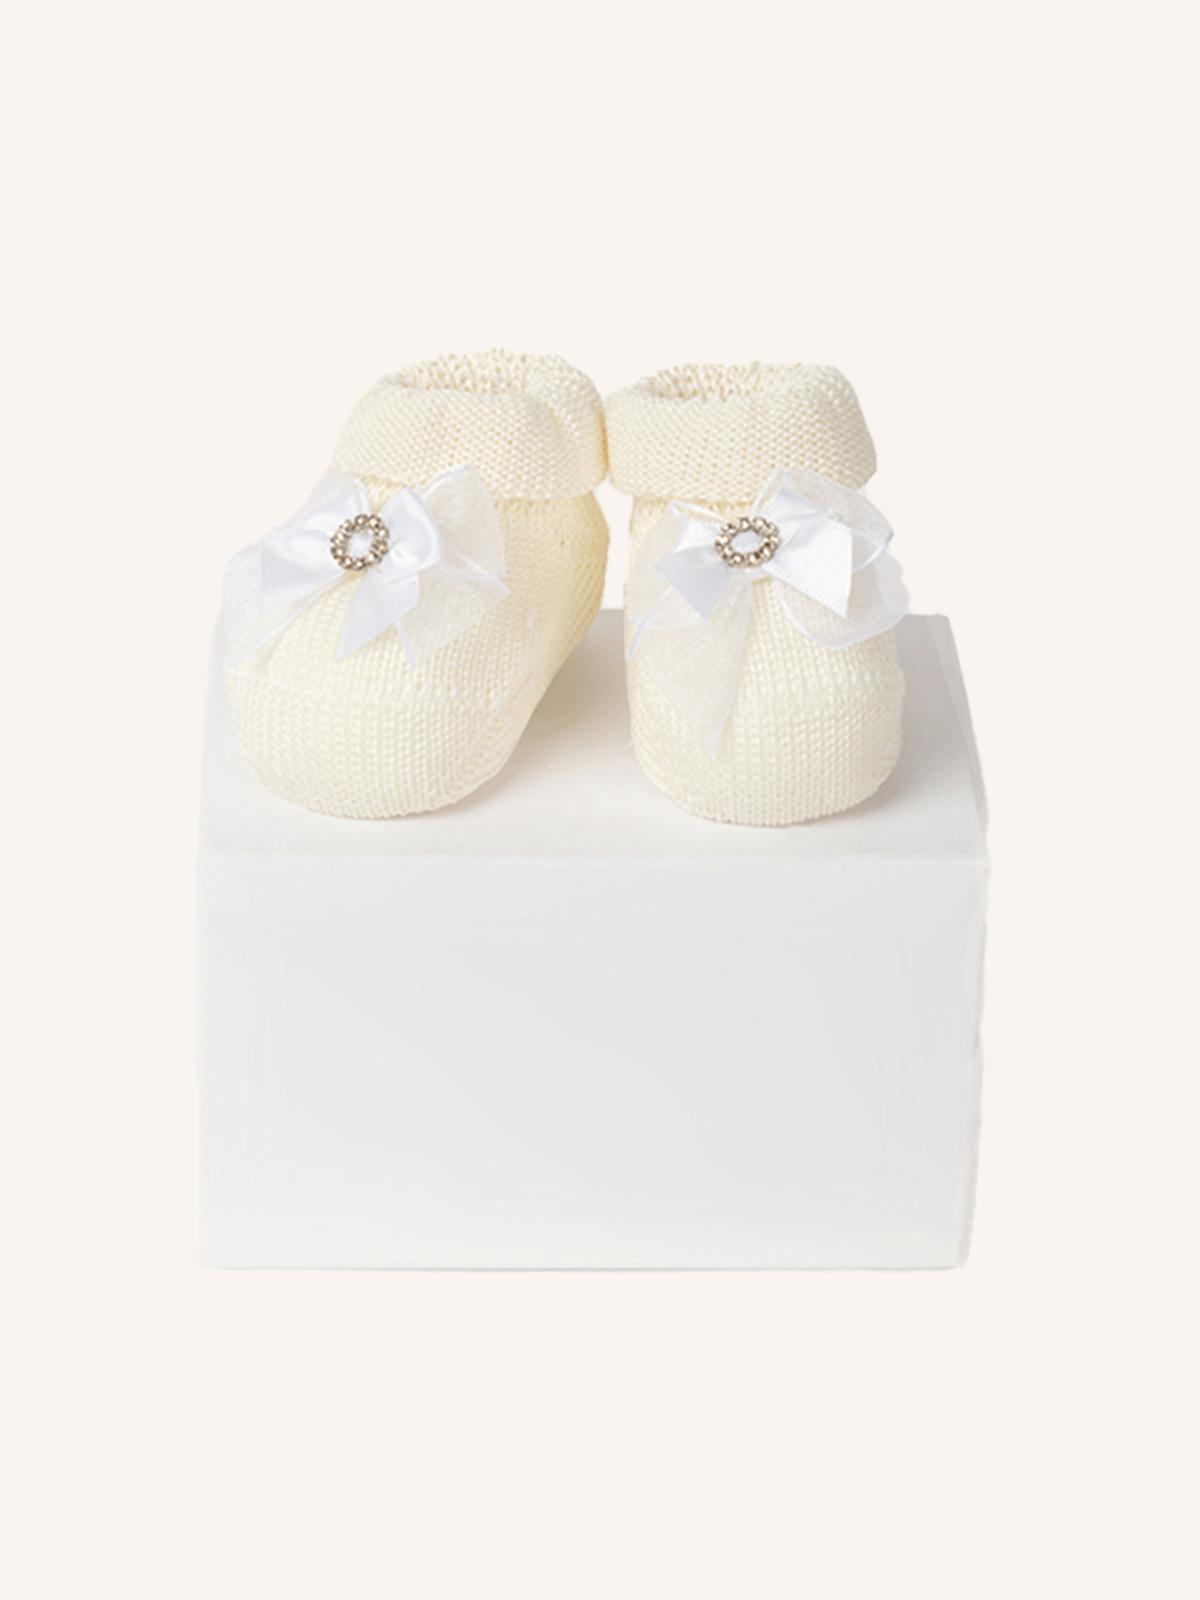 Slipper in Cotton with Satin Bow and Rhinestone Circle for Newborn | Ivory Color | Pack of 1 Pair | 42932